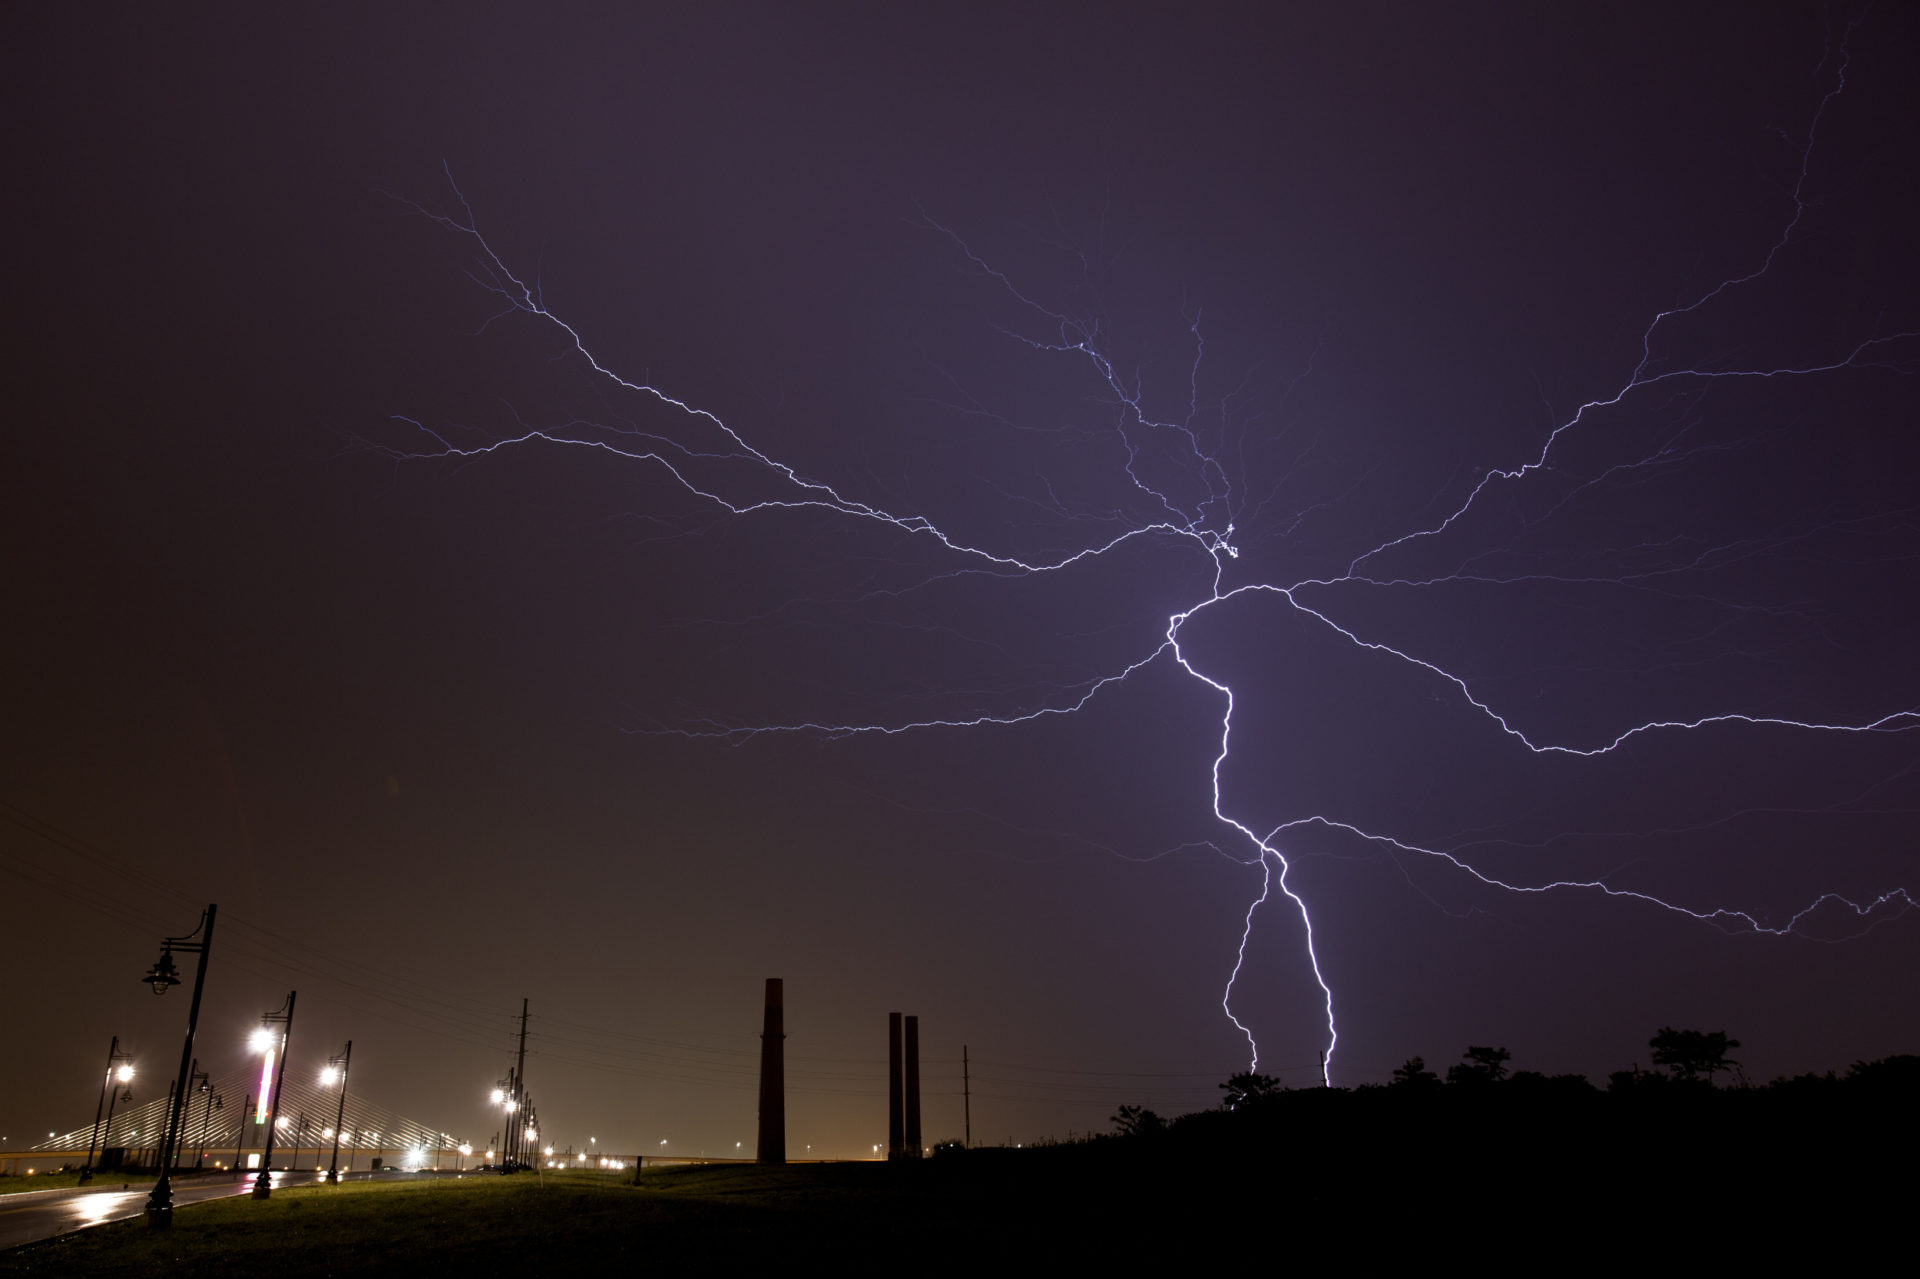 Lightning strikes over an industrial area